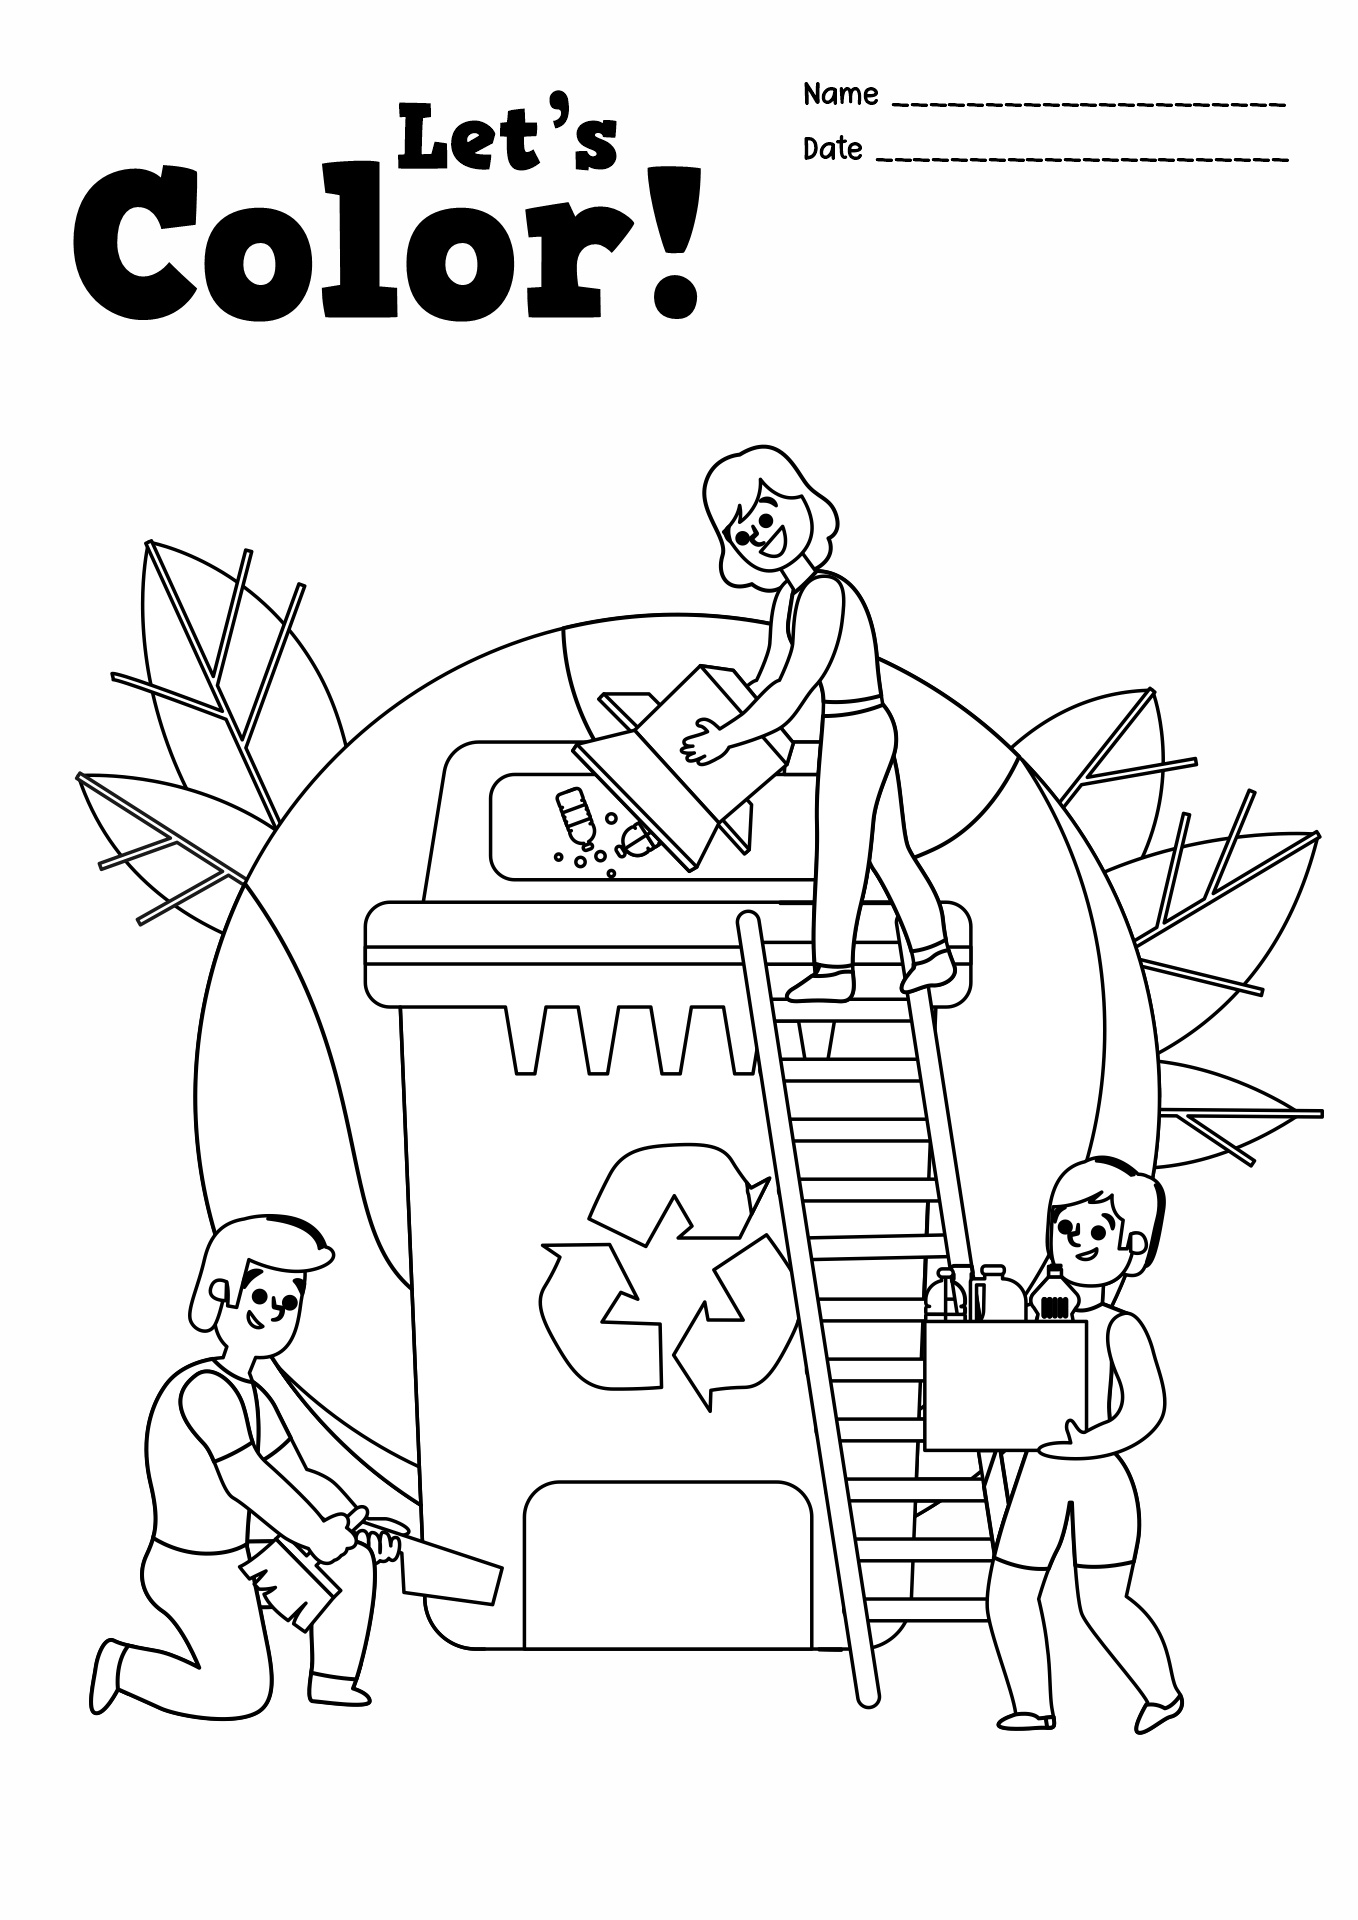 12-best-images-of-recycling-coloring-worksheets-recycling-fun